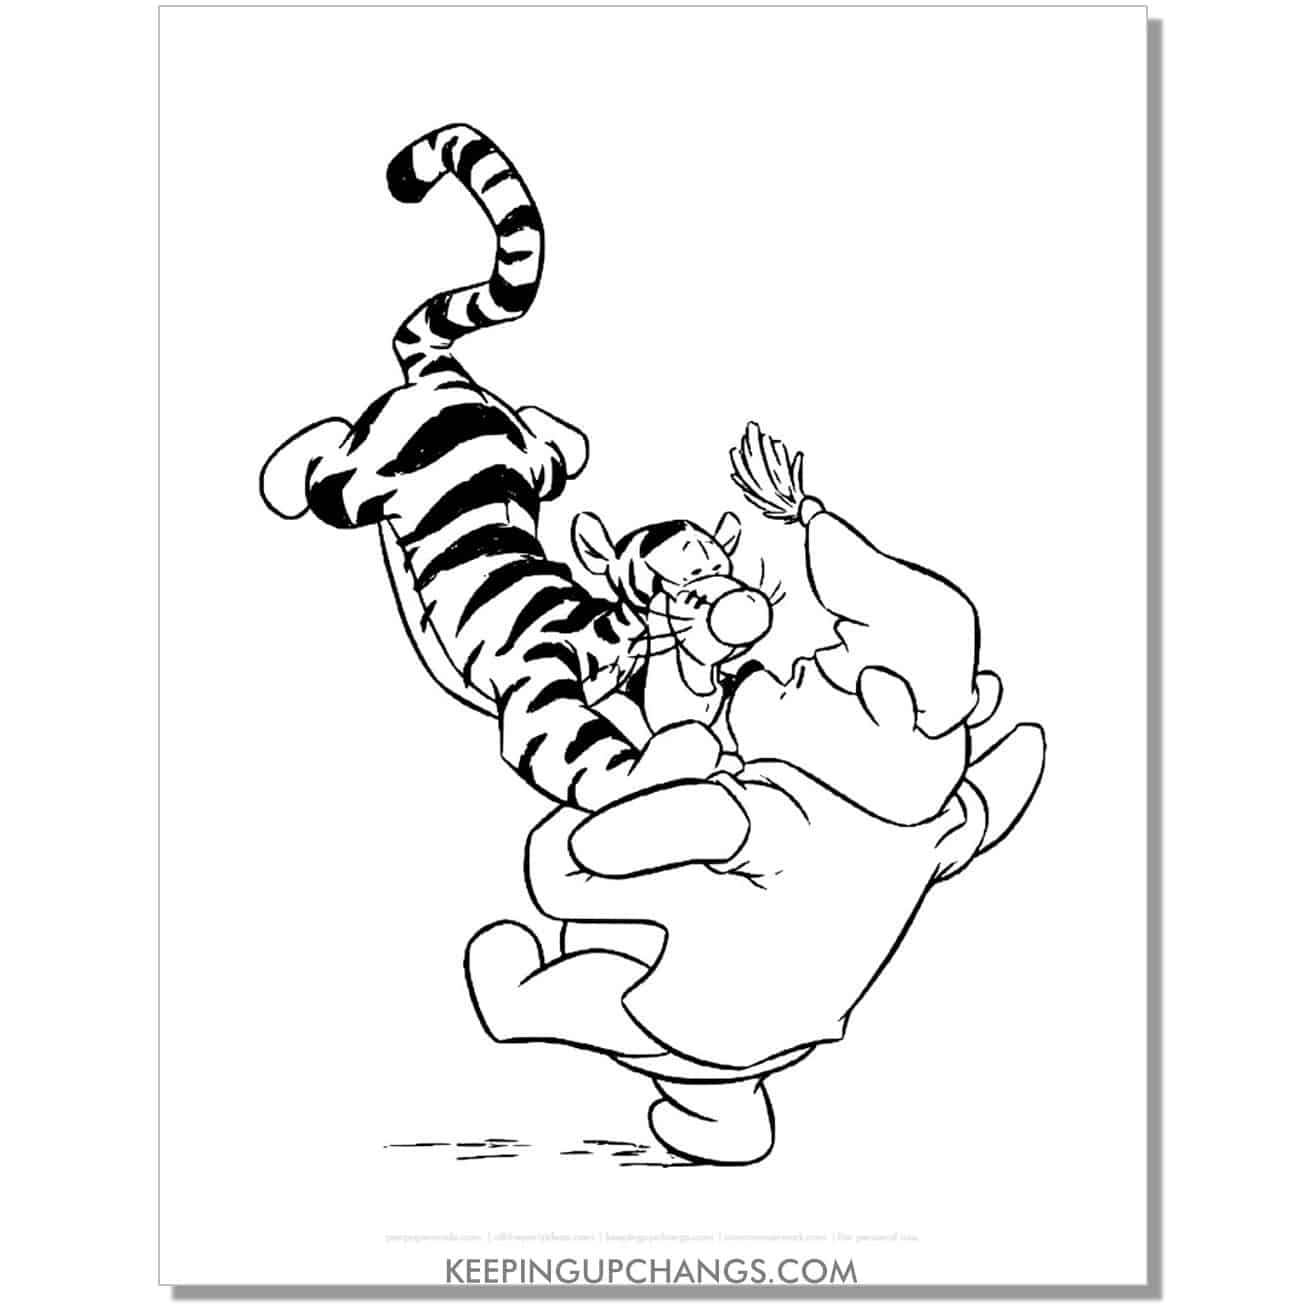 tigger pounces on winnie the pooh coloring page, sheet.